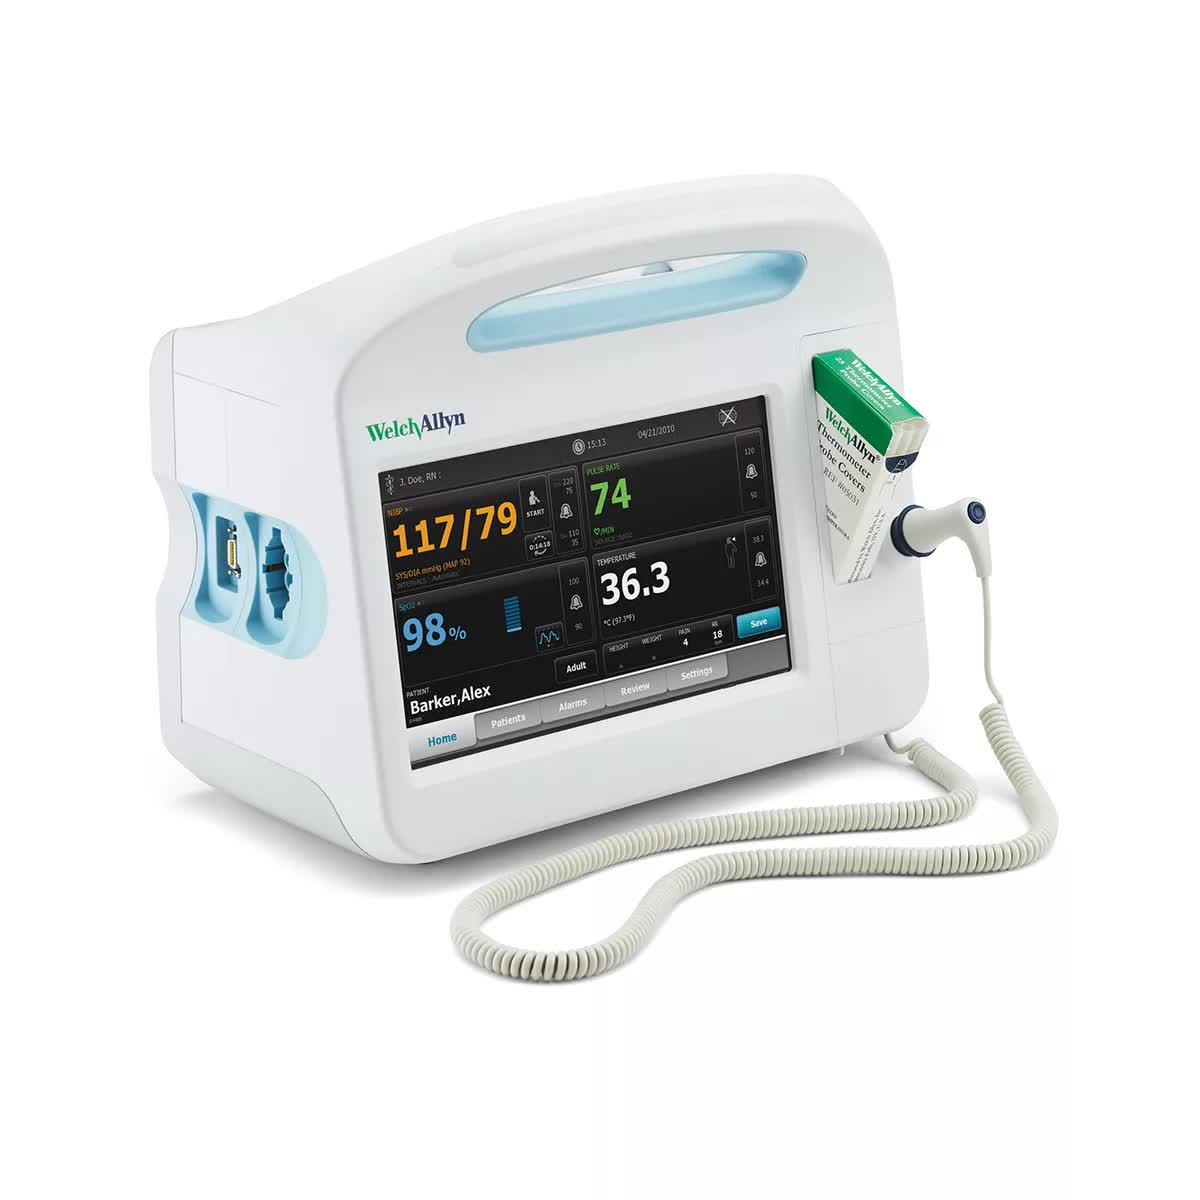 Welch Allyn Connex 6800 Series Vital Signs Monitor with Masimo SpO2, SureTemp Plus and Printer